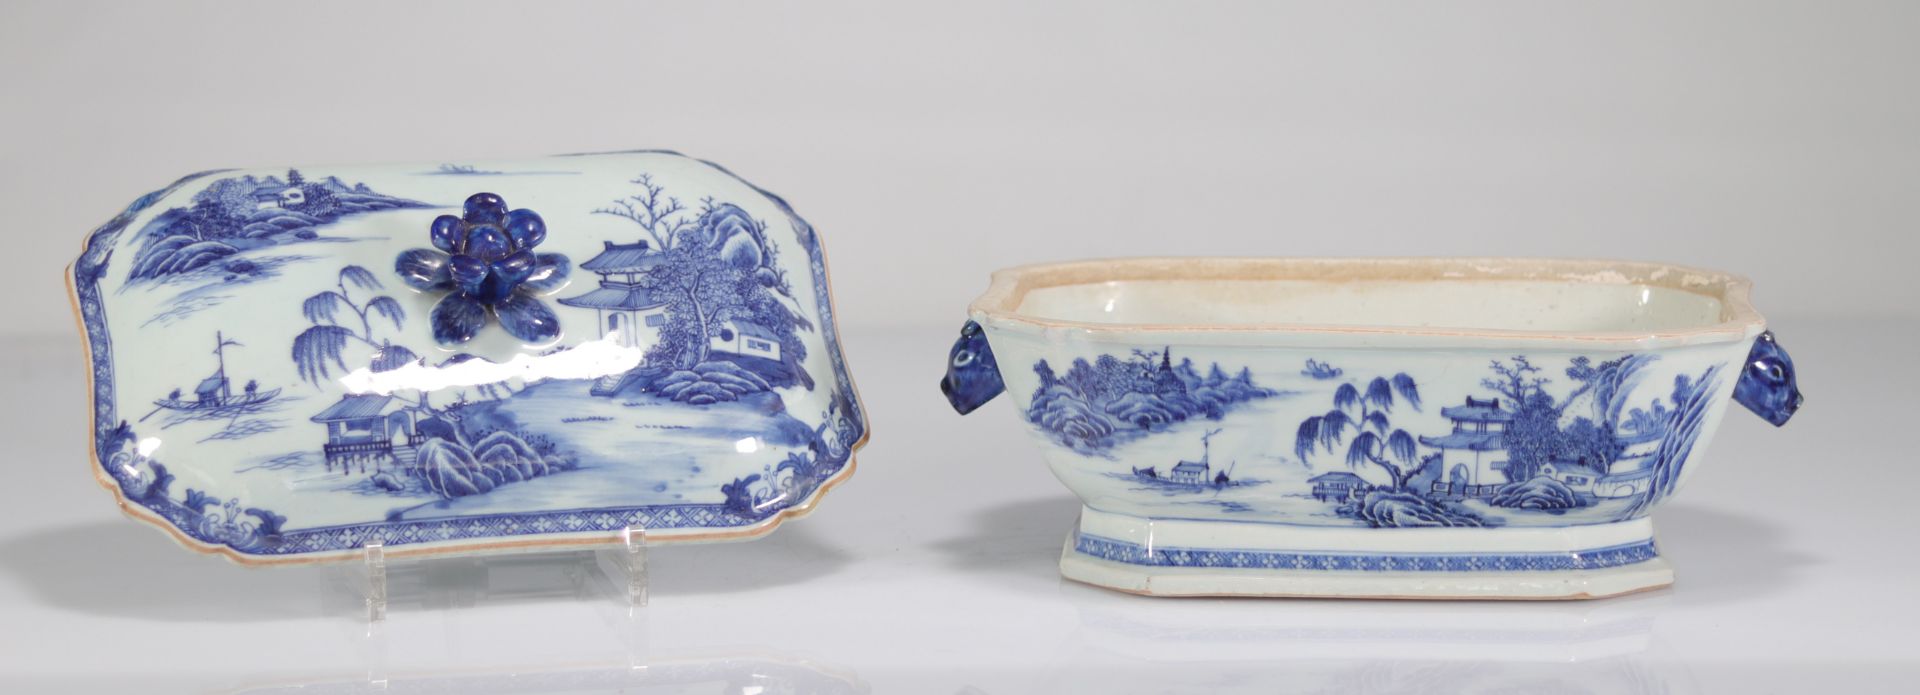 China vegetable dish and blue white tray 18th - Image 4 of 4